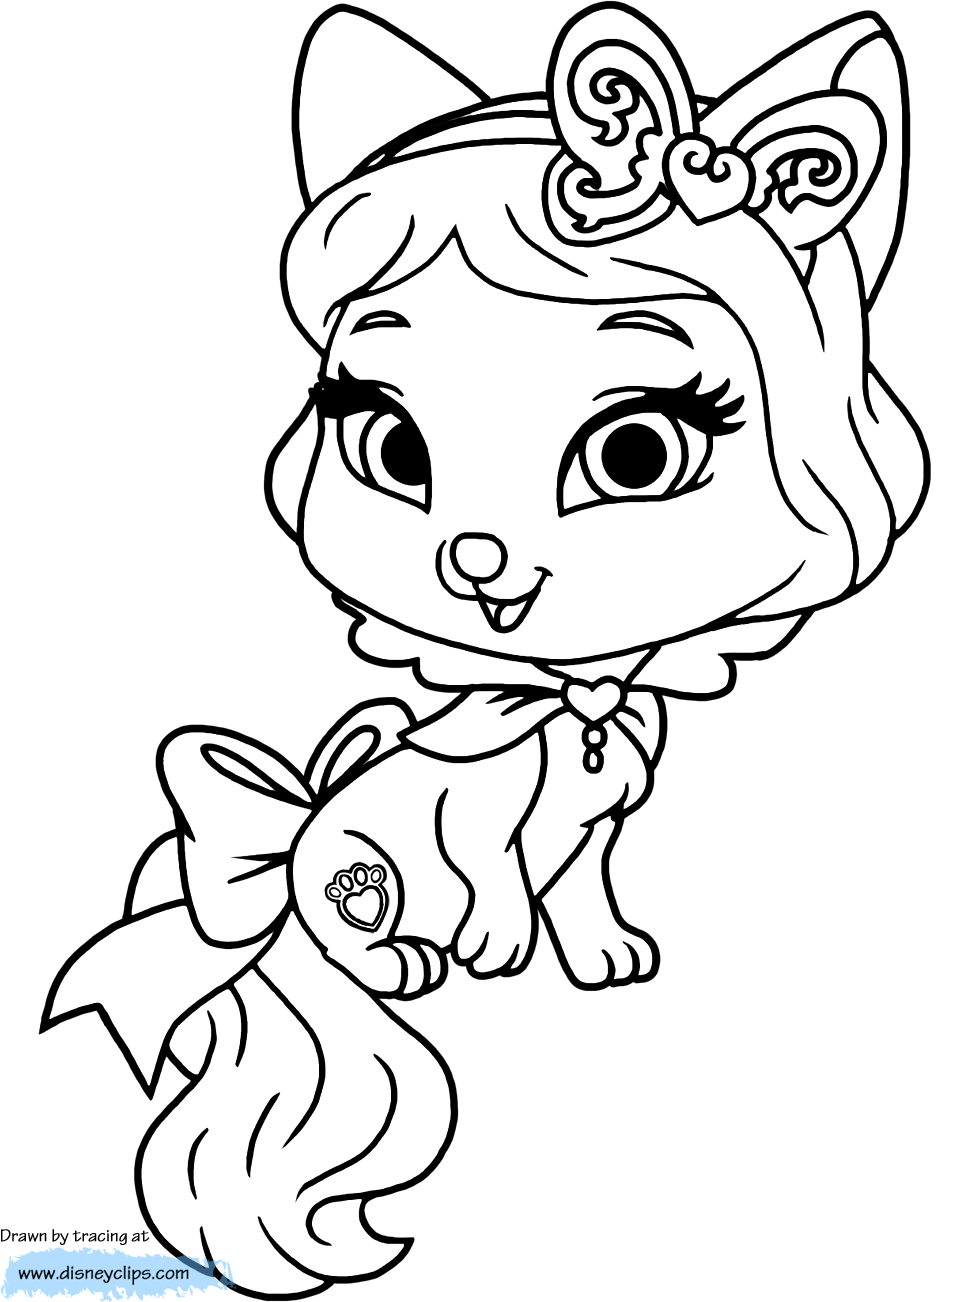 Coloring: Disney Palace Pets Printable Coloring Pages Disney Coloring